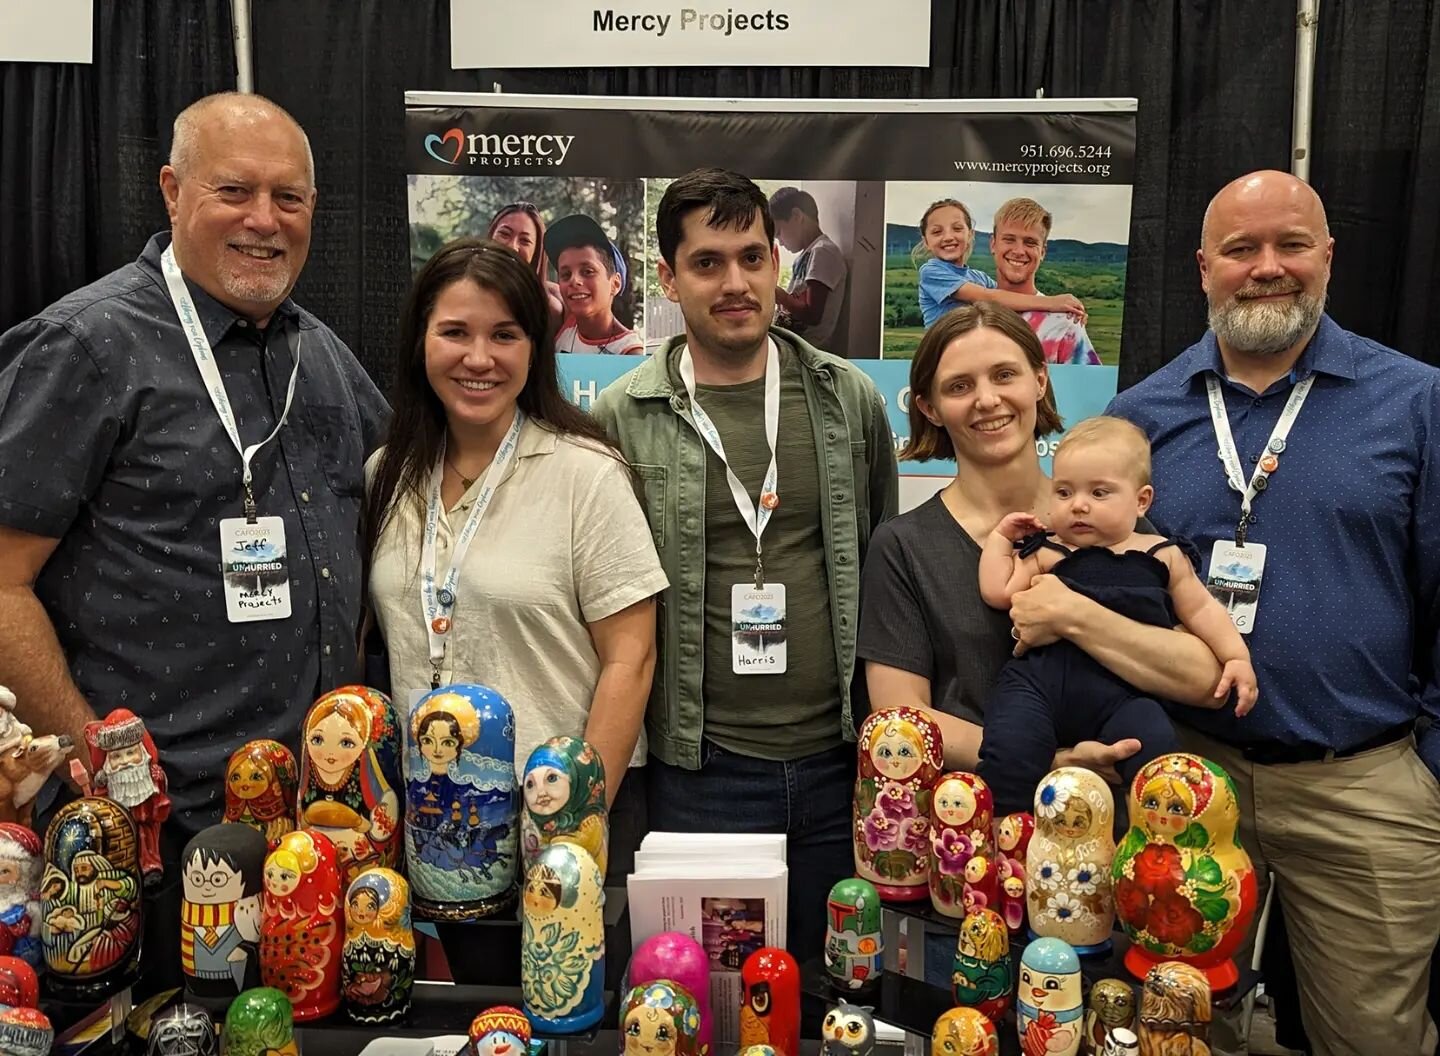 We are at the Christian Alliance for Orphans this week connecting with old and new friends! 

Here we are with our friends from Mercy Project and Ukraine Without Orphans. 

Always great to connect and co-labor for the Kingdom and reach the most vulne